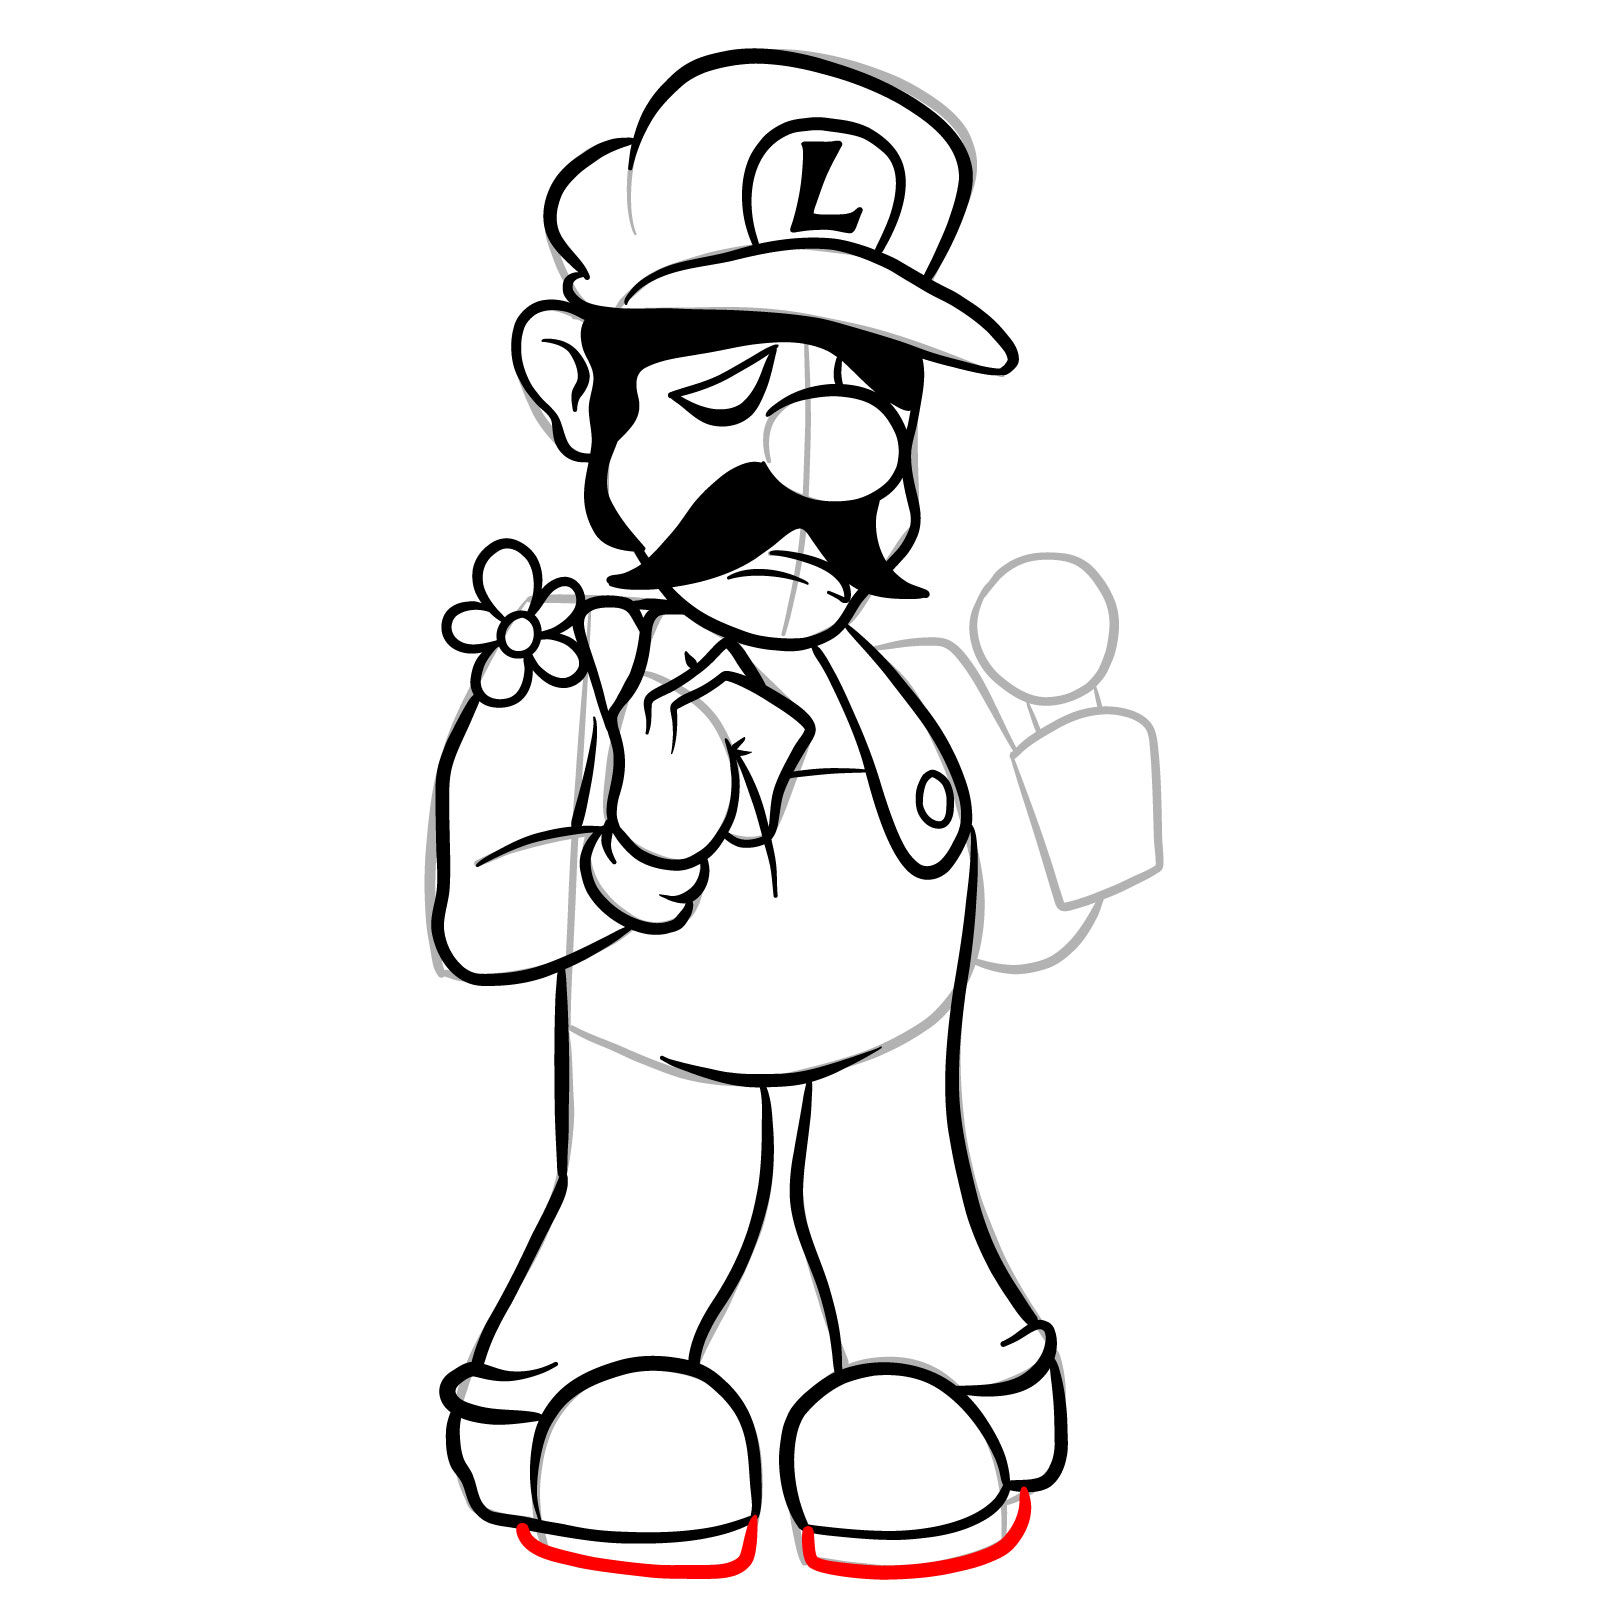 How to draw Beta Luigi from FNF - step 27